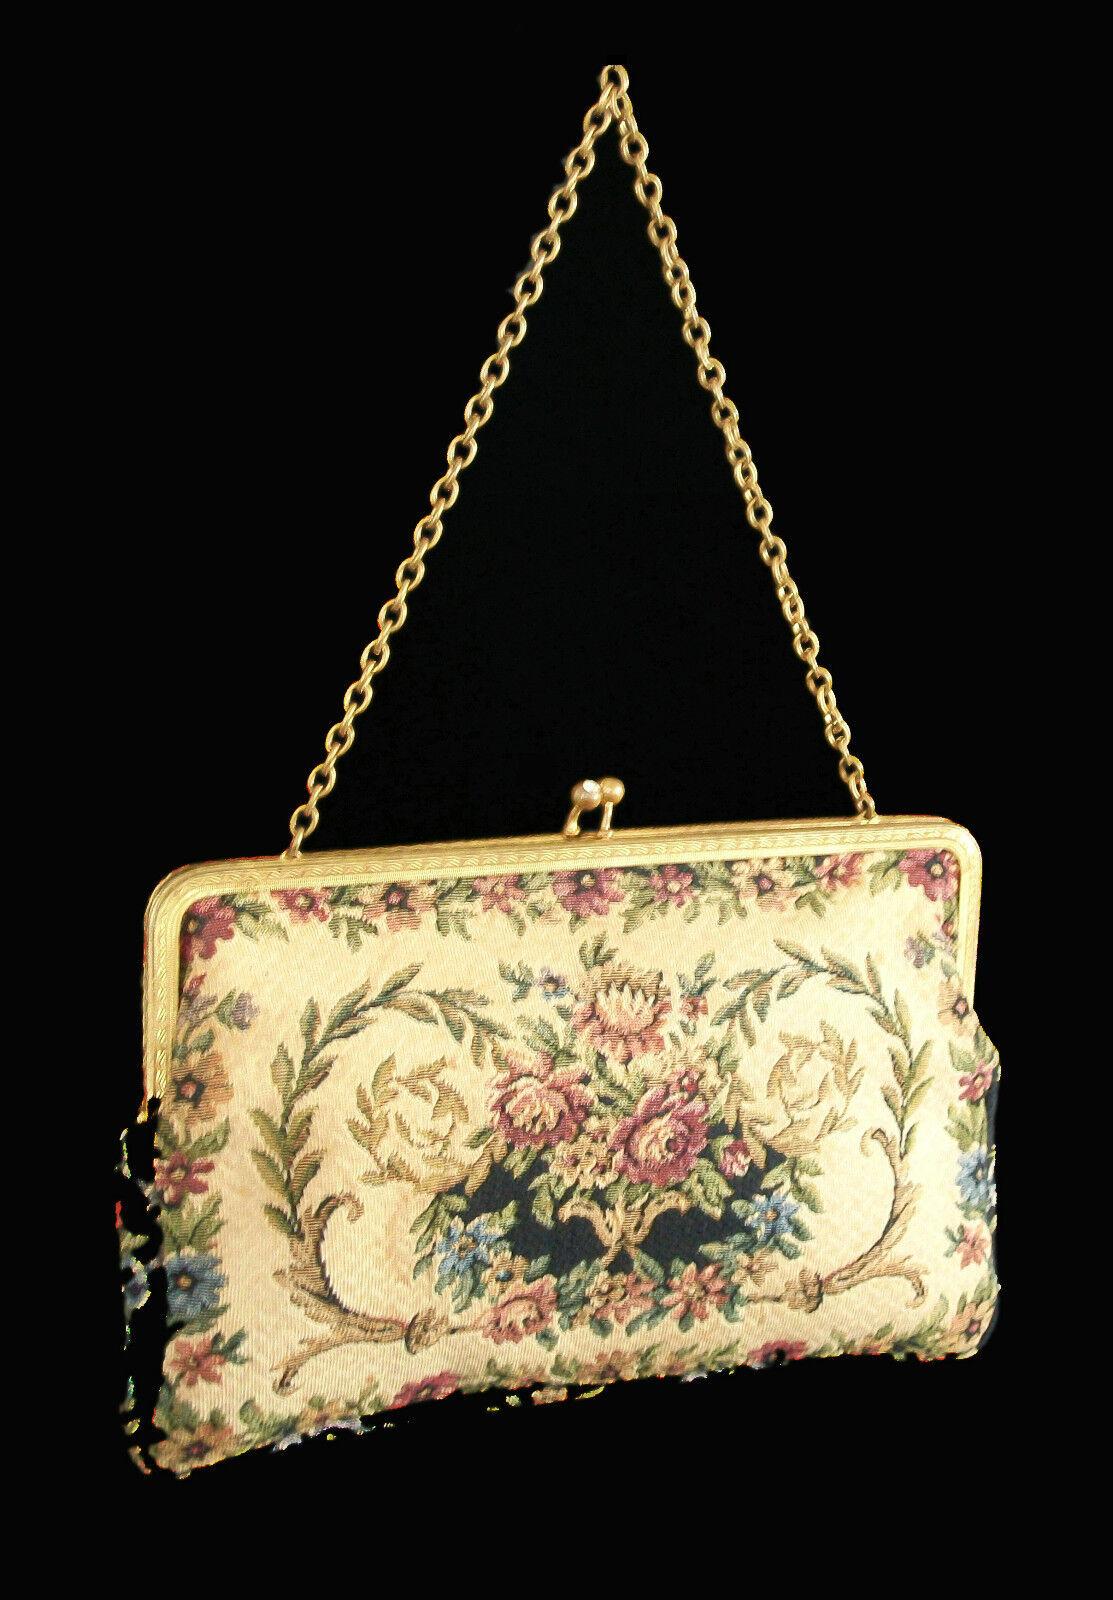 Brass Vintage Tapestry Evening Bag - Rhinestone Closure - Unsigned - Mid 20th Century For Sale